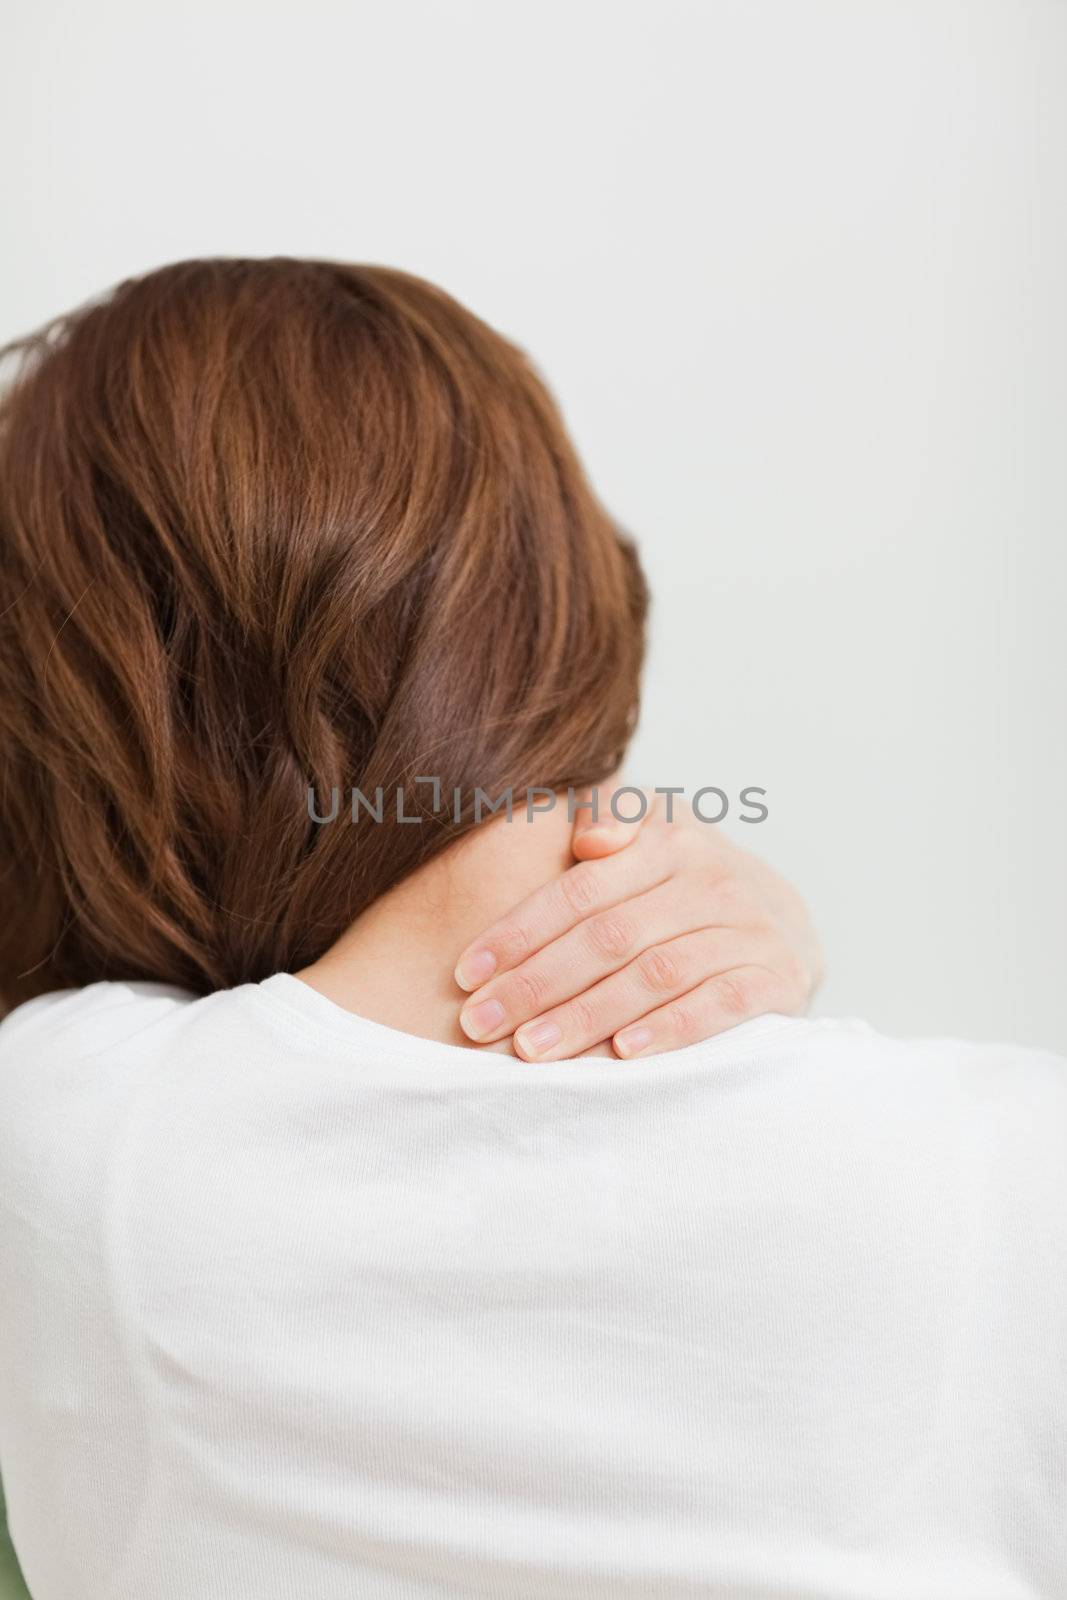 Brown-haired woman massaging her painful neck in a room